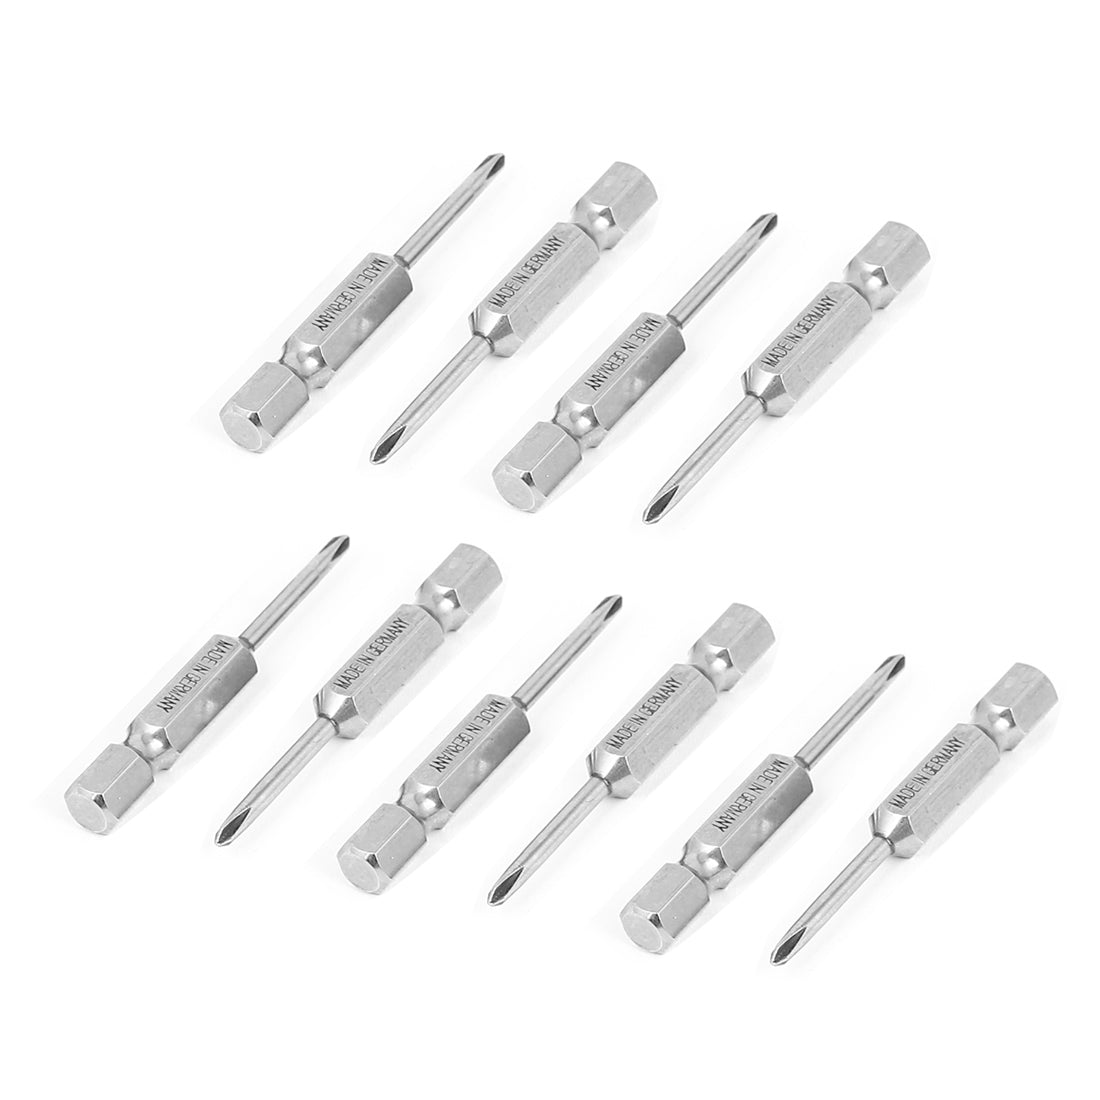 uxcell Uxcell 10pcs 1/4" Hex Shank PH0 2.5mm Tip Magnetic S2 Steel Phillips Screwdriver Bits